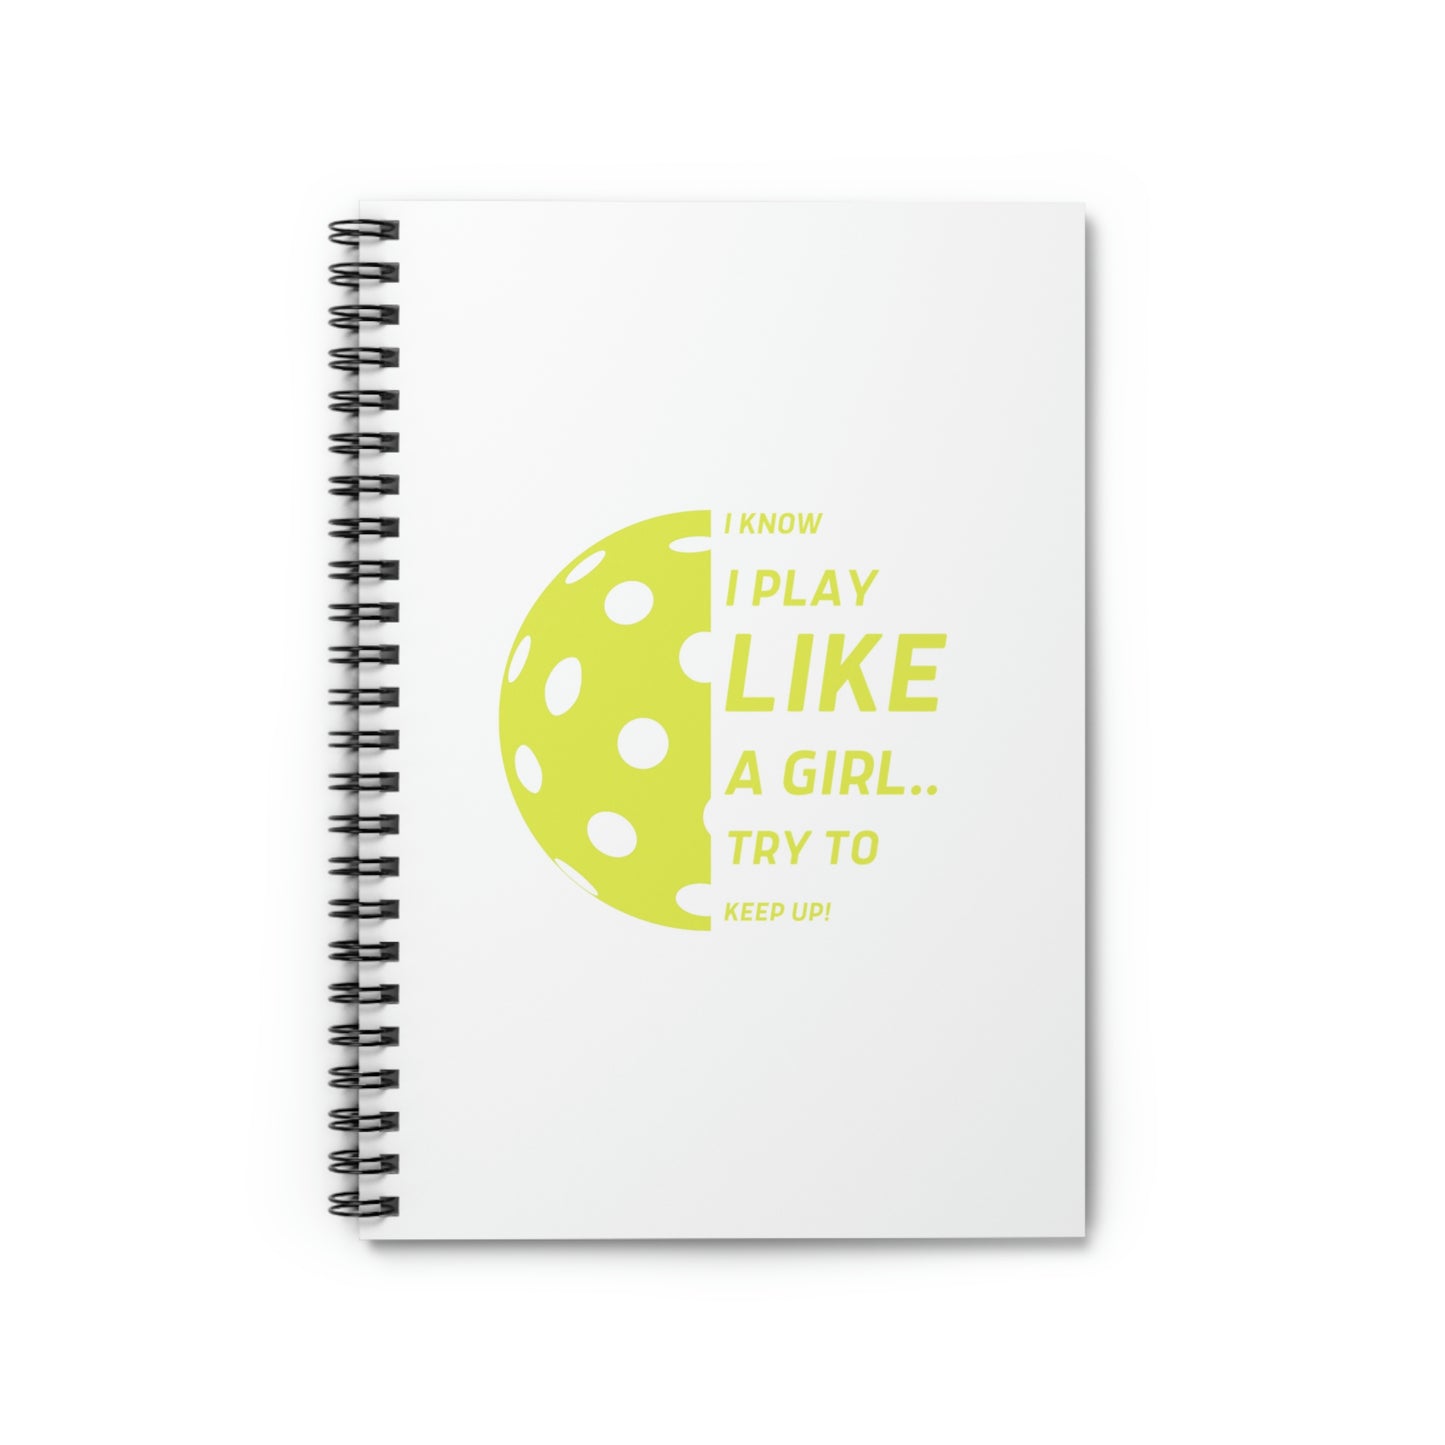 Spiral Notebook - Ruled Line  (Yellow Graphic)